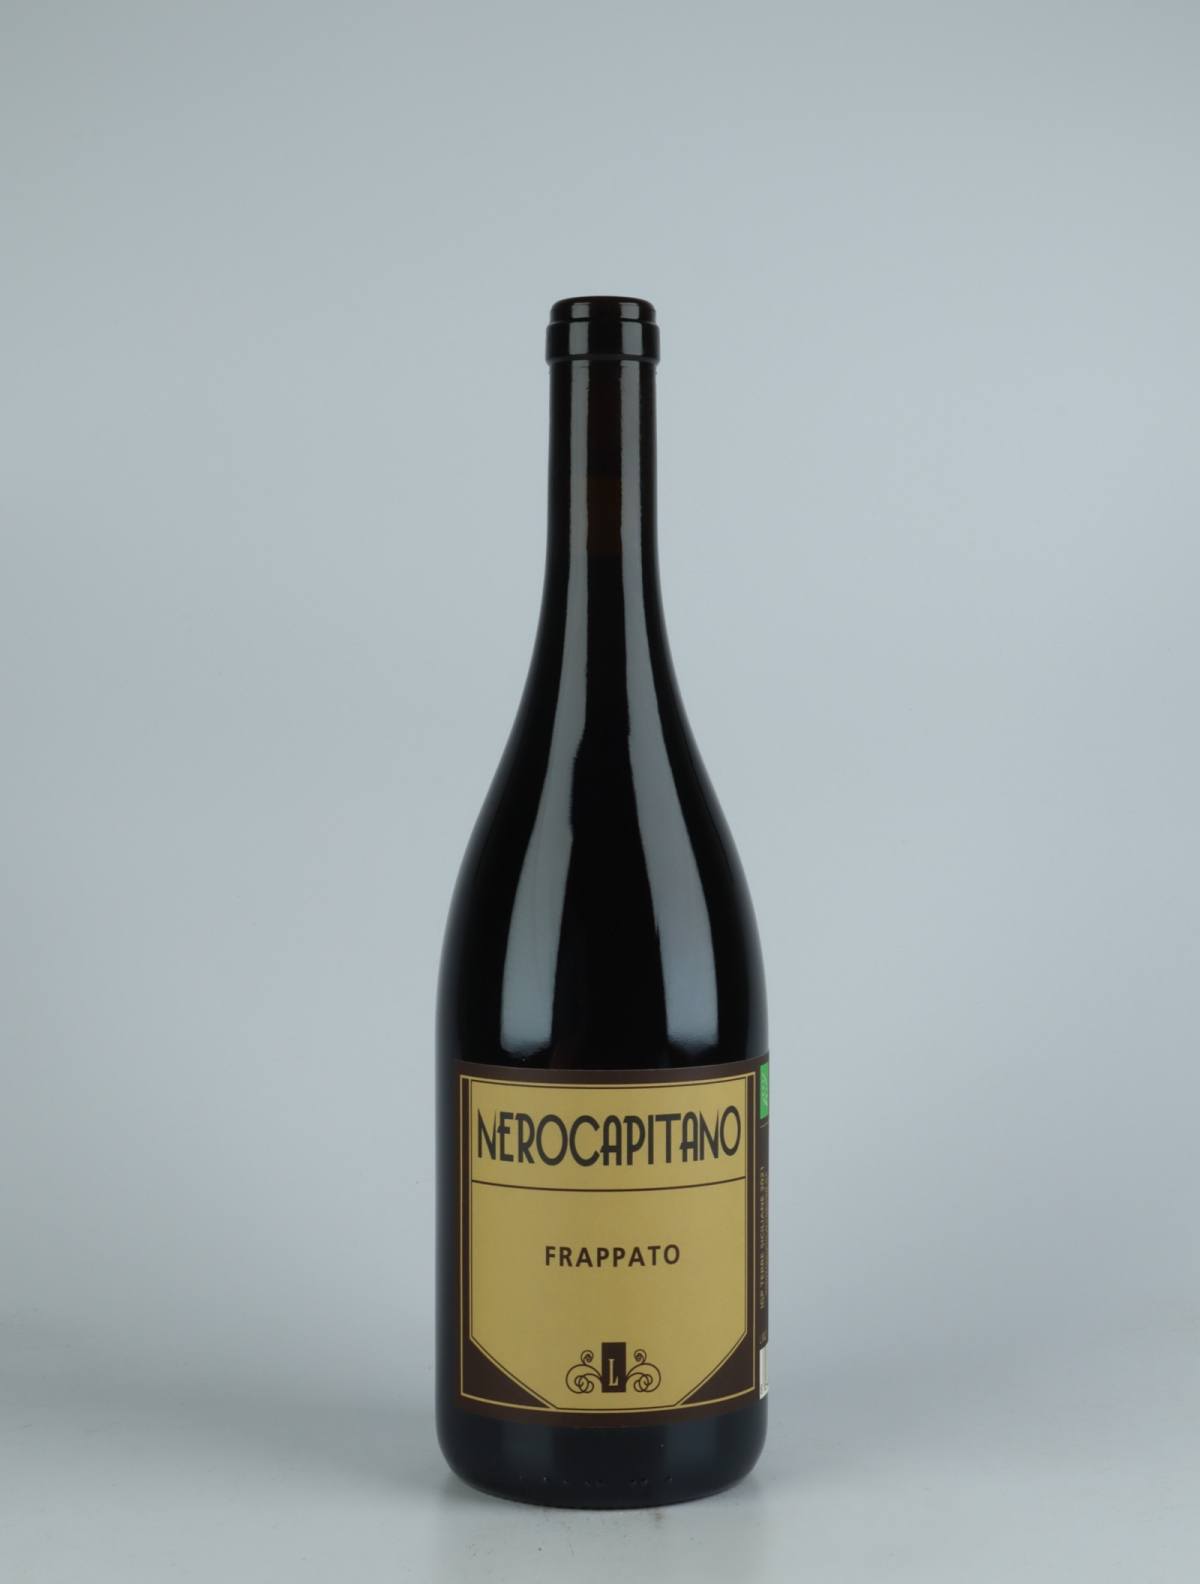 A bottle 2021 Nerocapitano Red wine from Lamoresca, Sicily in Italy